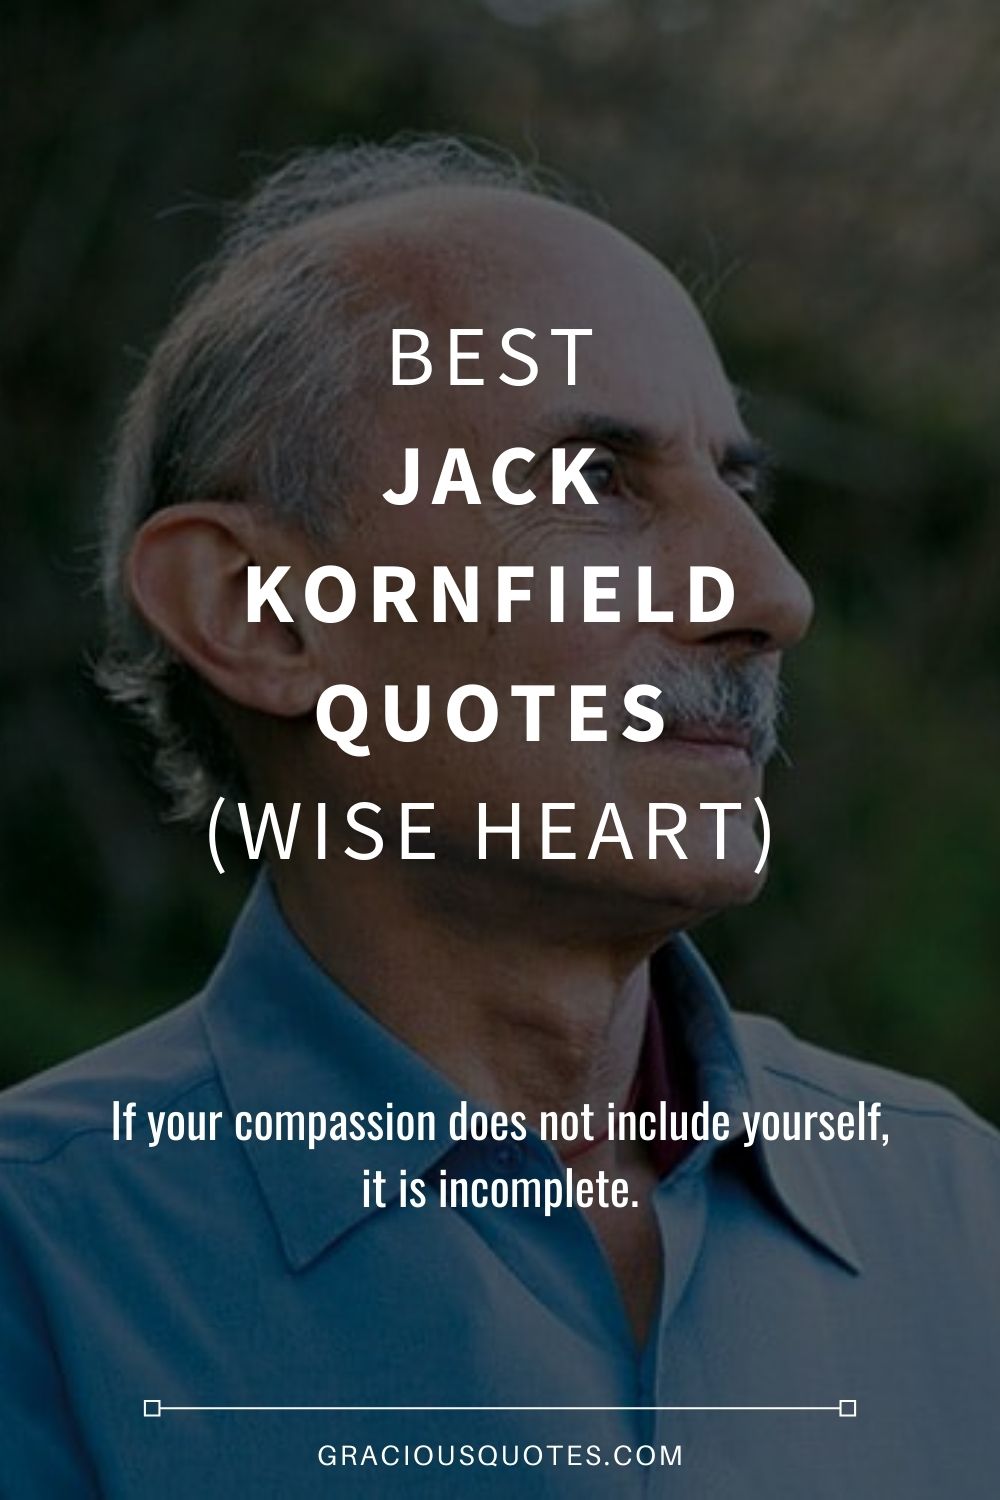 Best Jack Kornfield Quotes (WISE HEART) - Gracious Quotes